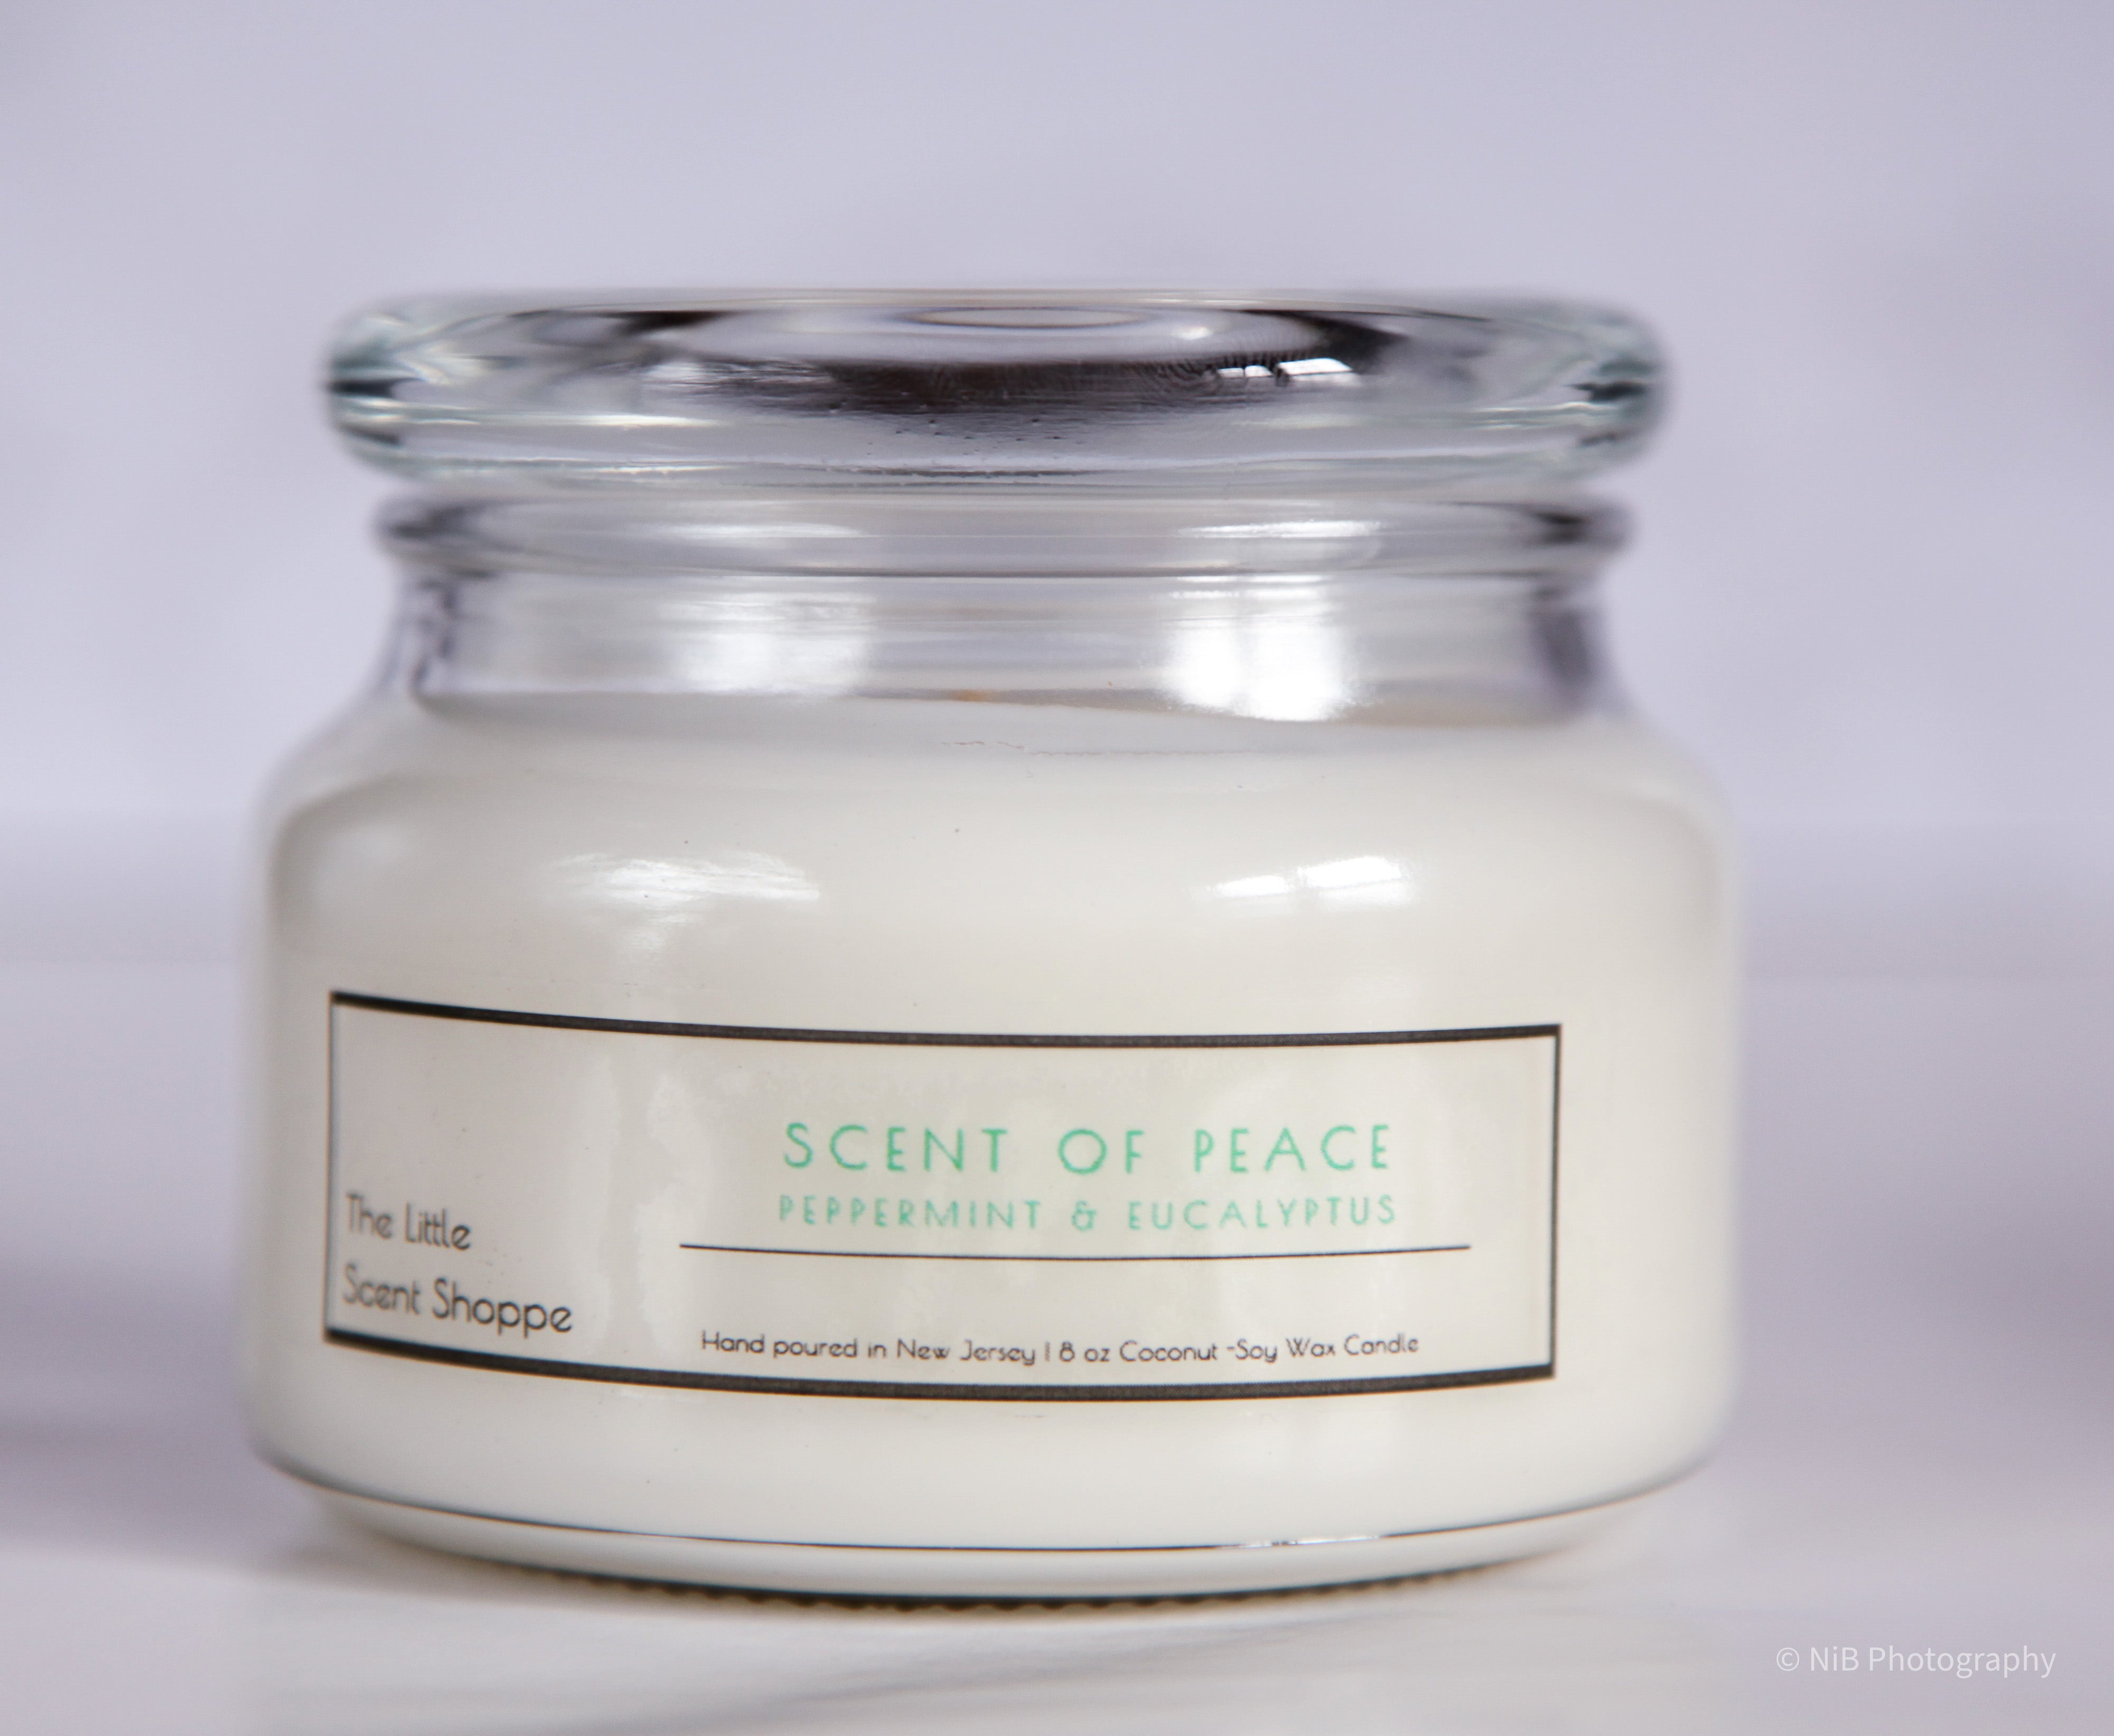 Scent of Peace Candle - The Little Scent Shoppe